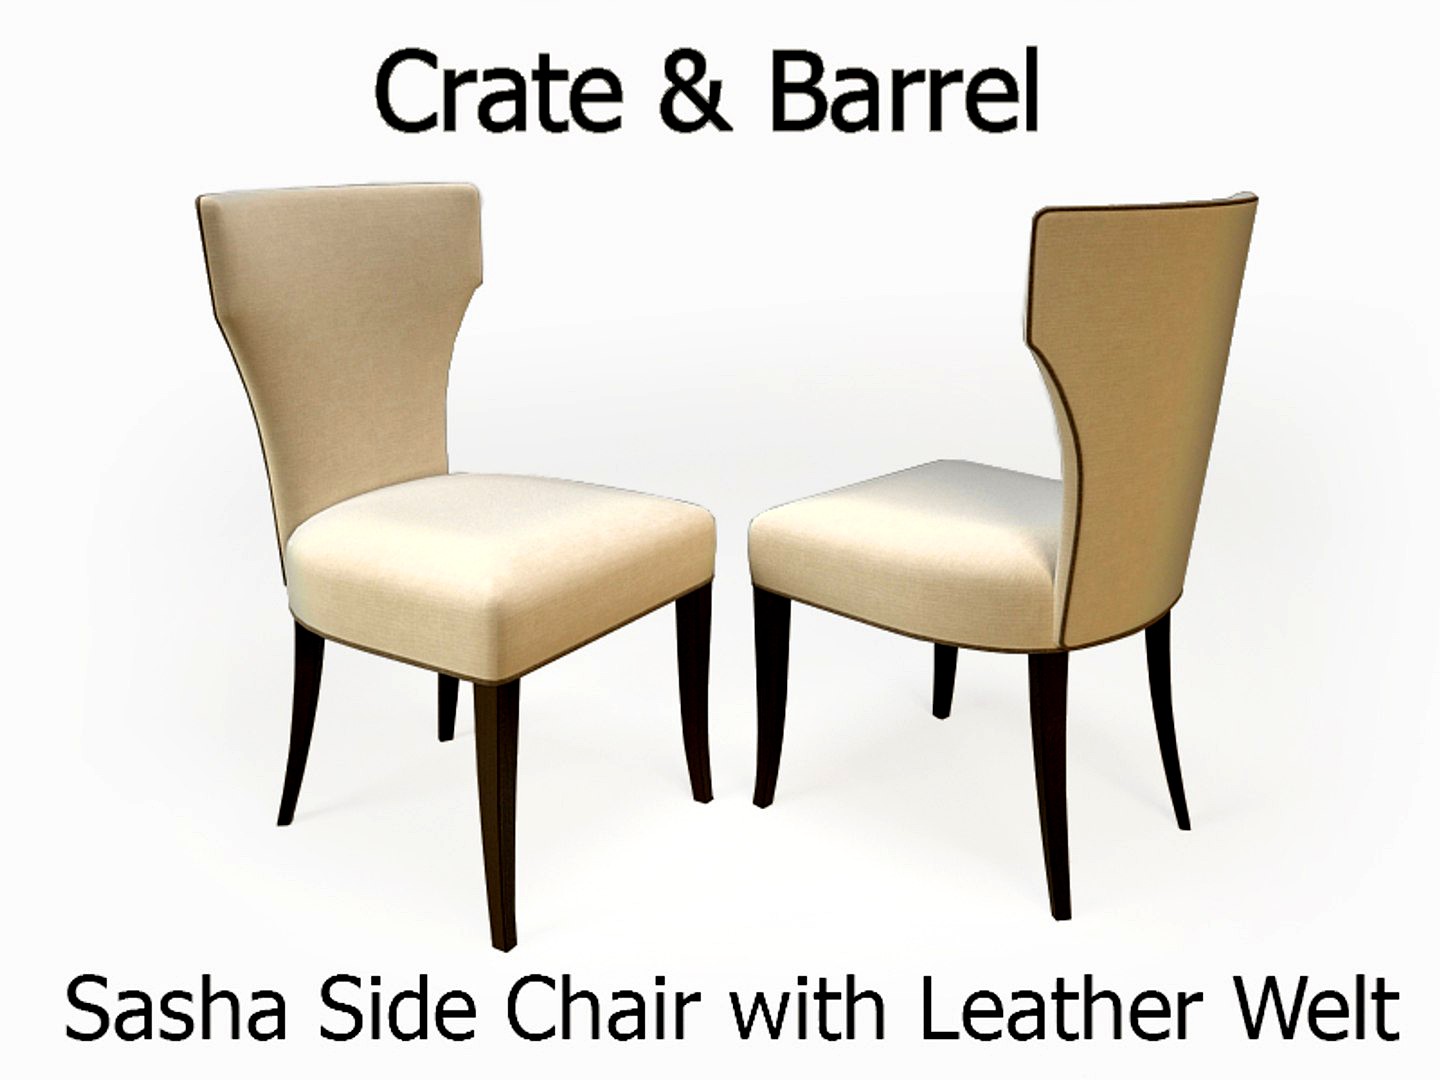 Crate & Barrel Sasha Side Chair with Leather Welt